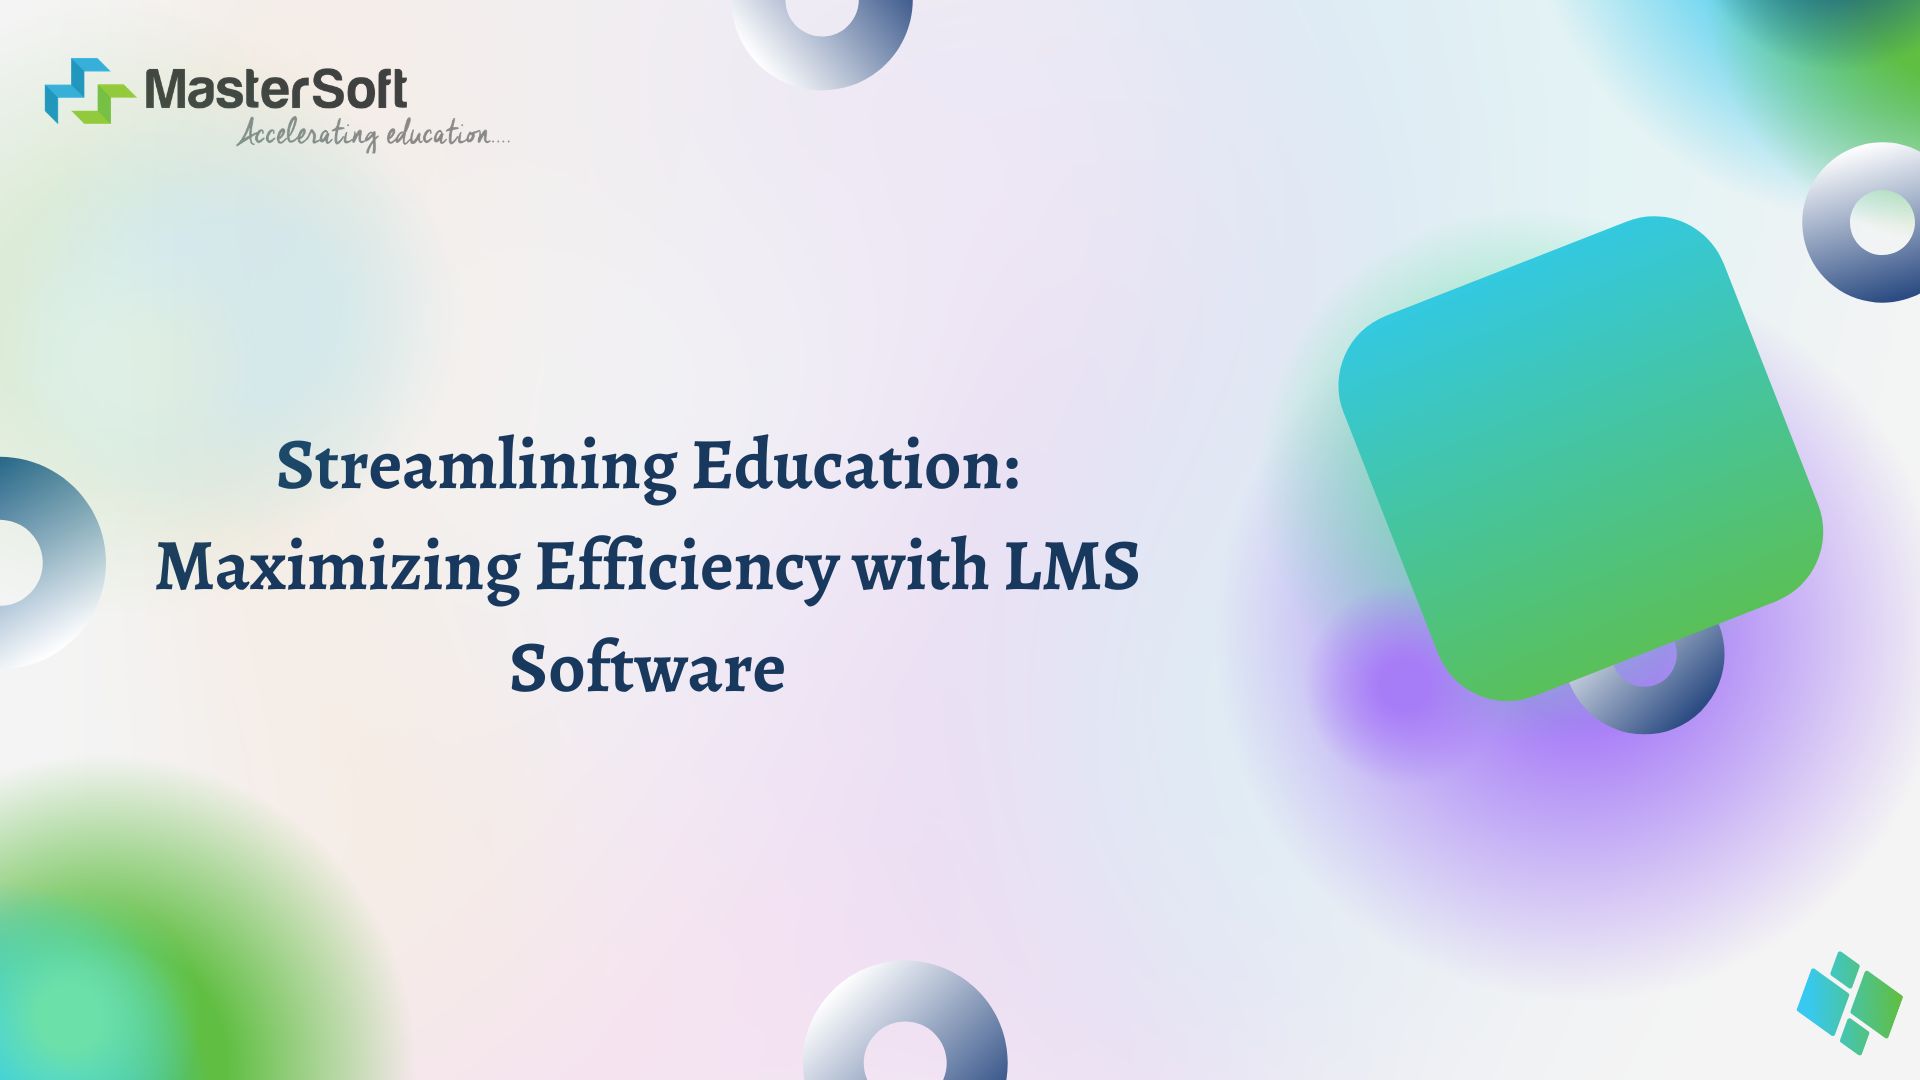 Streamlining Education: Maximizing Efficiency with LMS Software